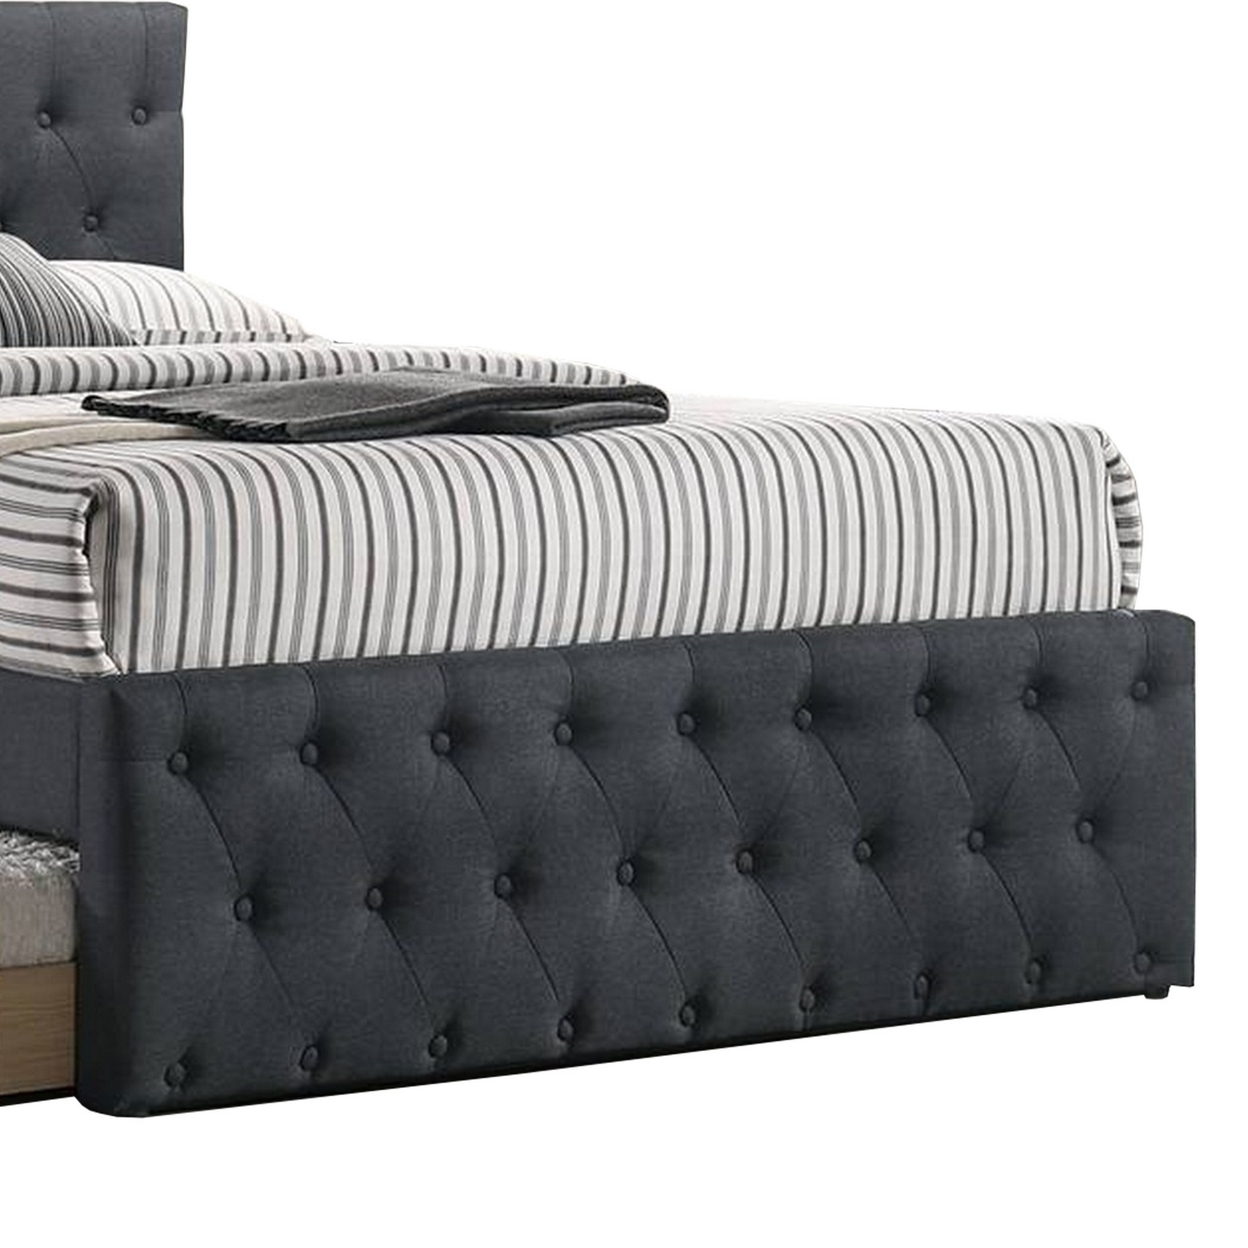 Nek Full Size Upholstered Bed With Twin Trundle, Tufted Charcoal Burlap- Saltoro Sherpi